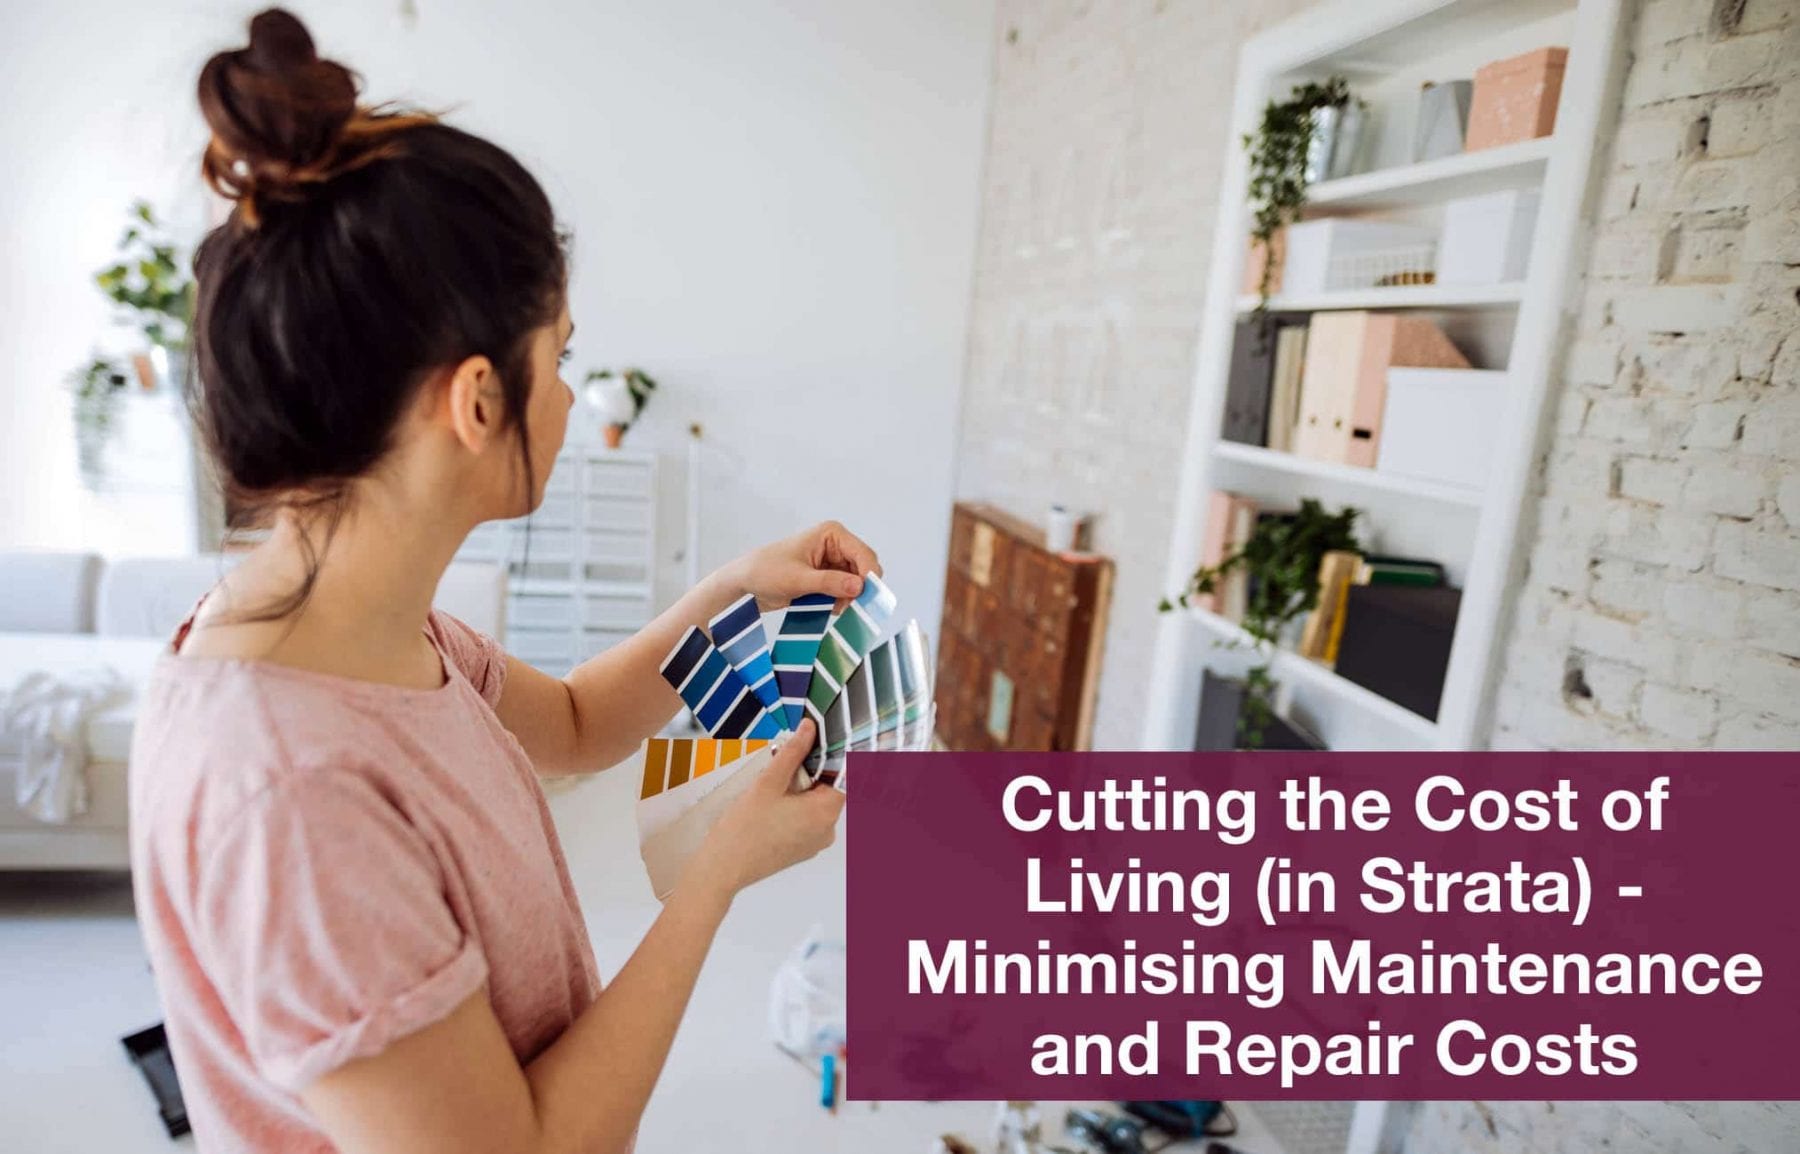 Cutting the cost of living (in strata) - minimising maintenance and repair costs